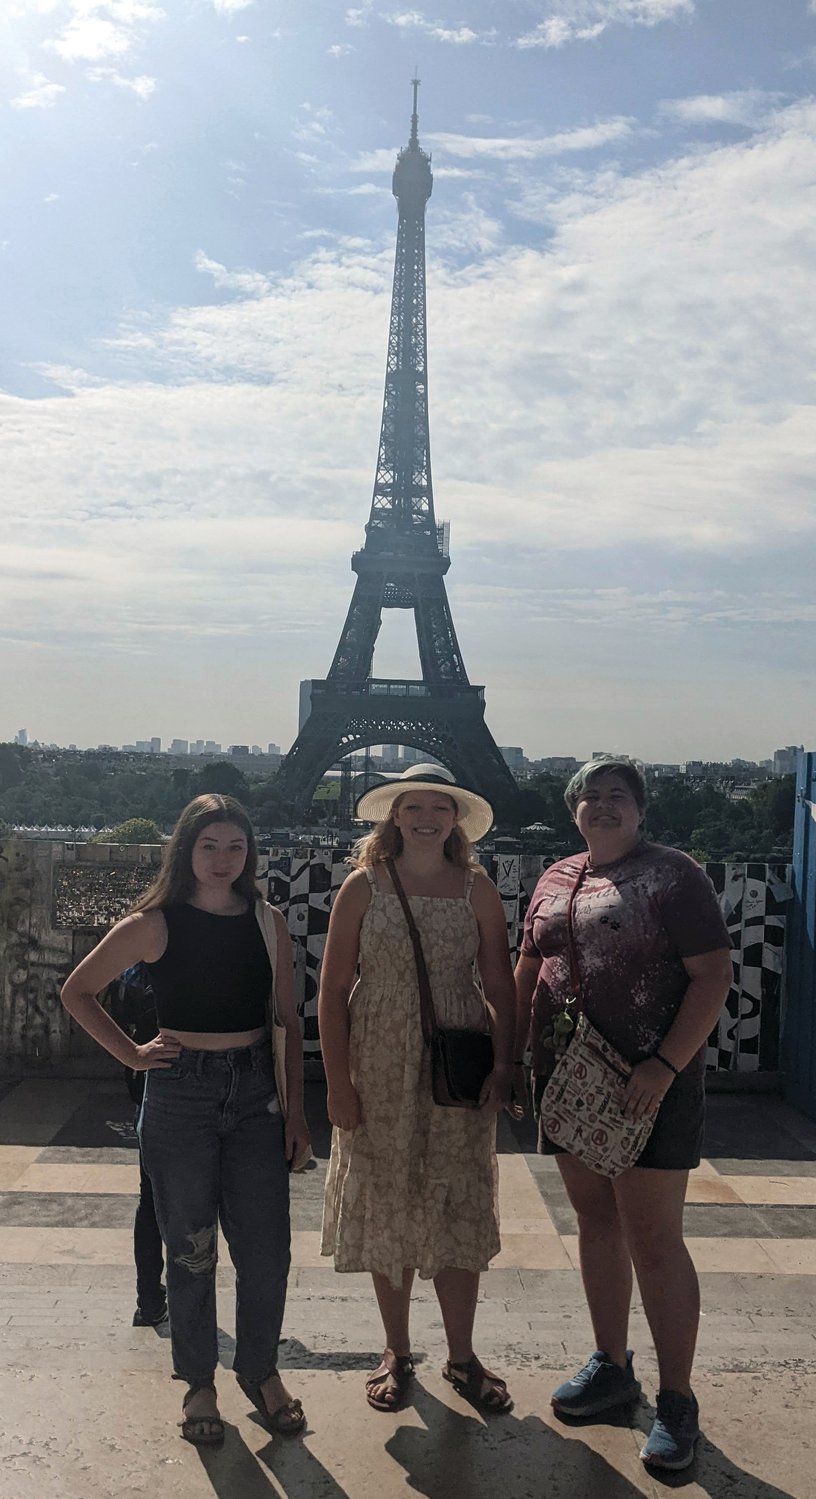 As a part of their trip, Michaela Troutman, Cassie Miller and Natalie Tome were able to visit Paris and see the Eiffel Tower.